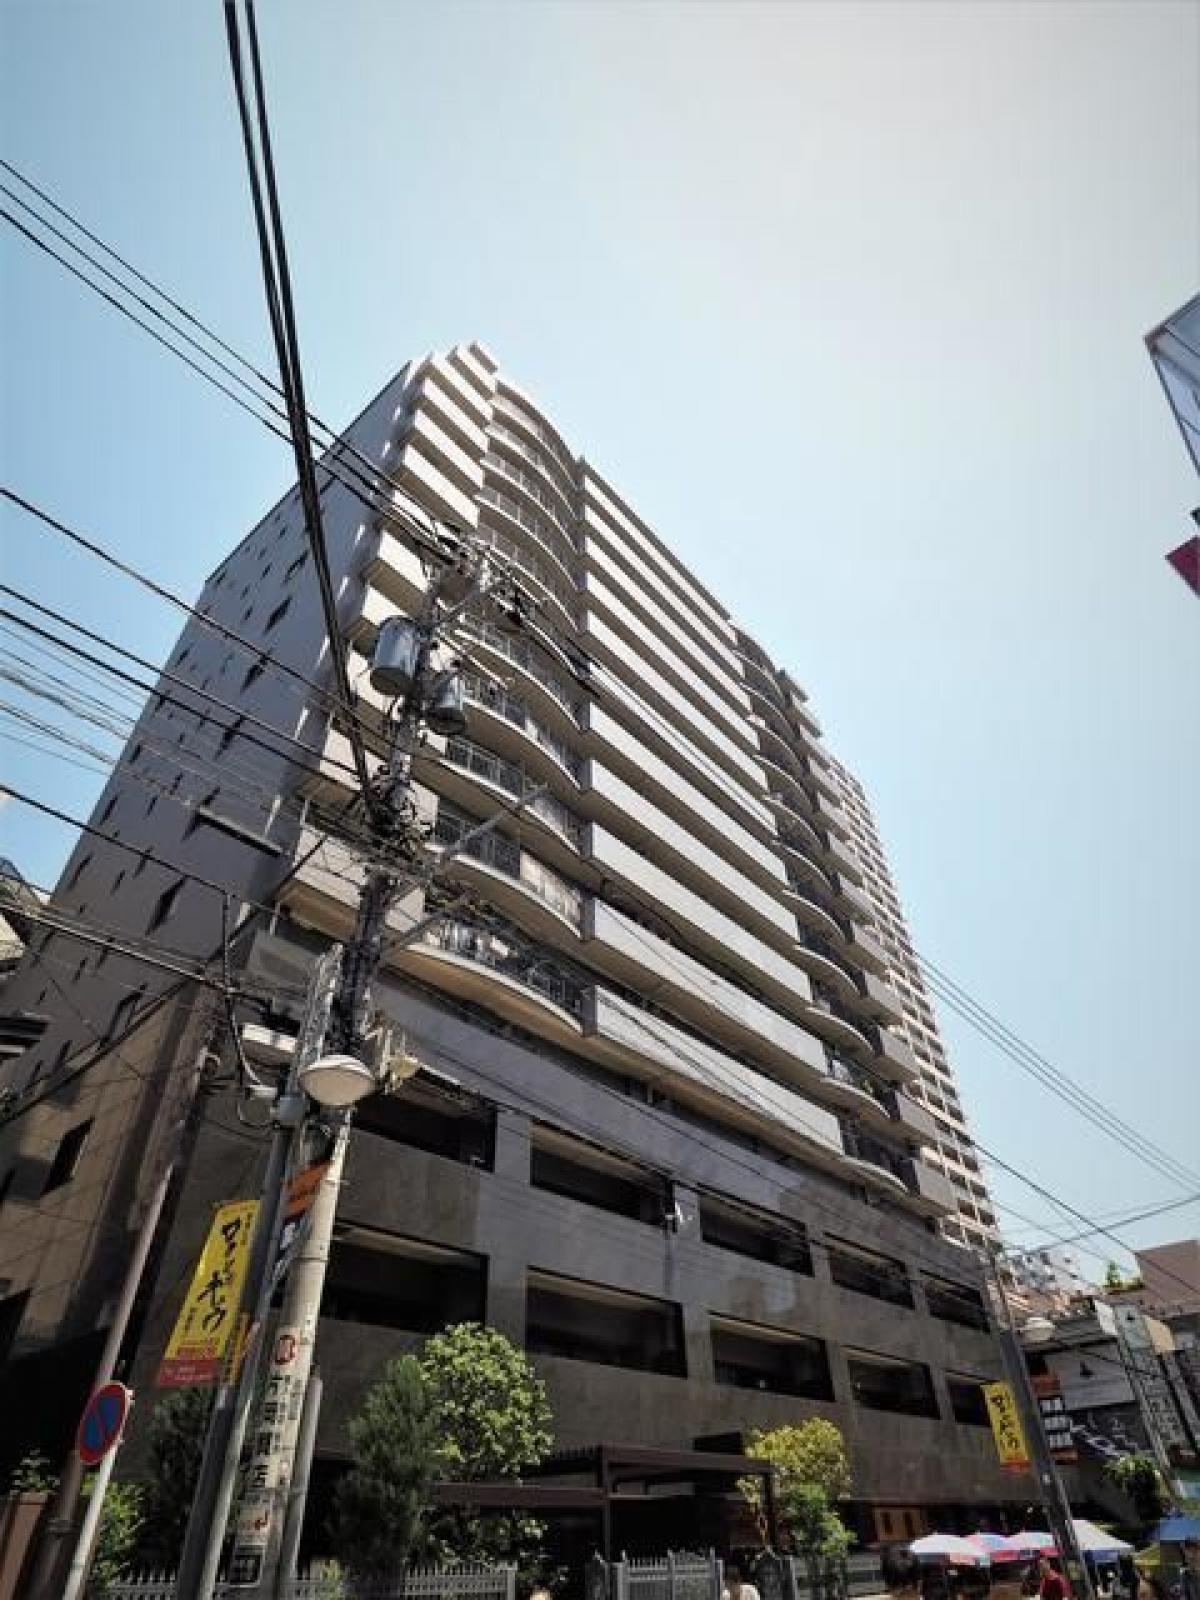 Picture of Apartment For Sale in Machida Shi, Tokyo, Japan